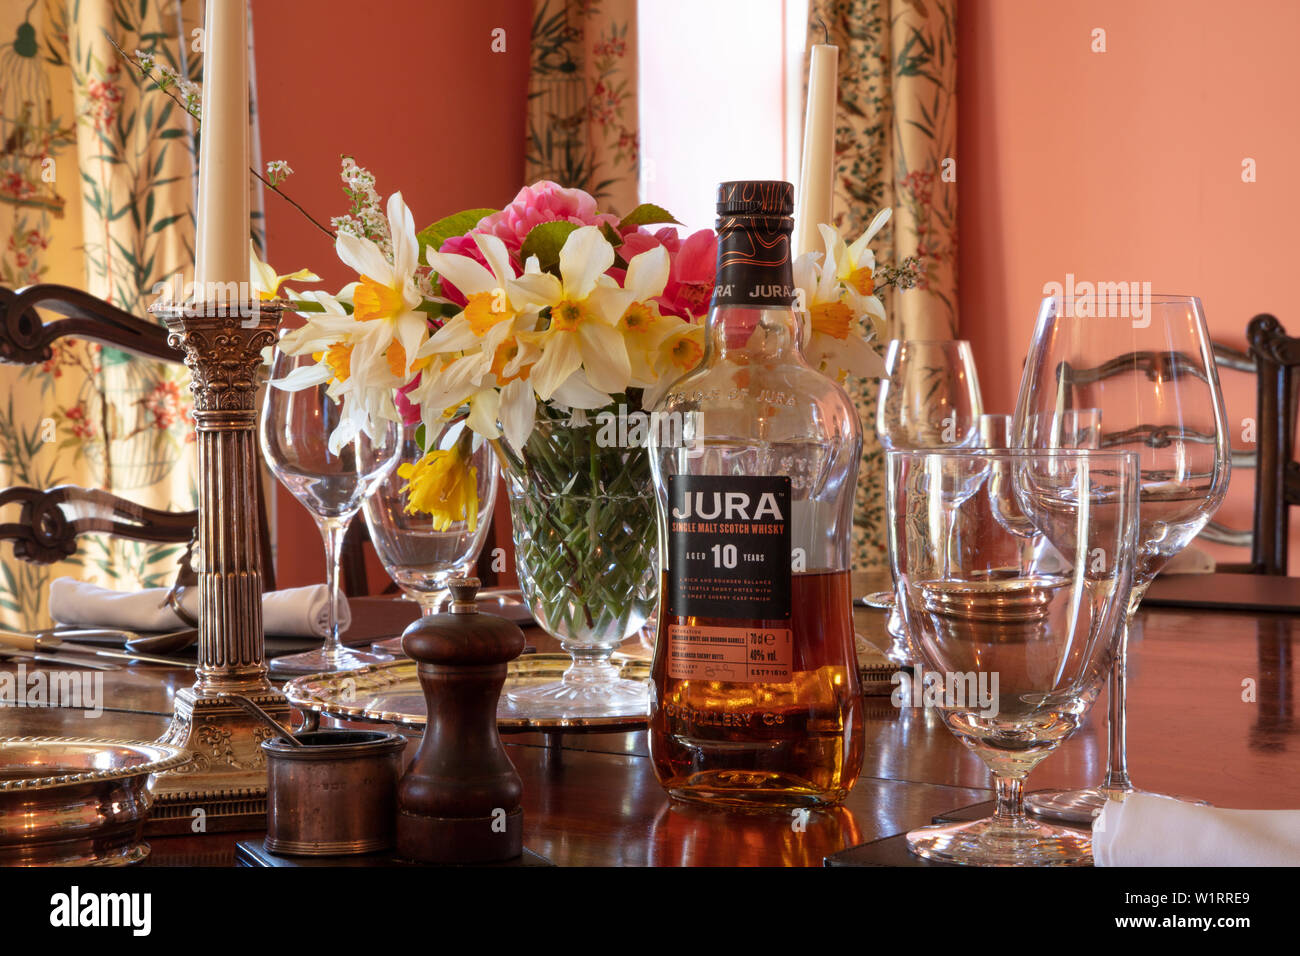 Whisky dinner dining table set up Stock Photo